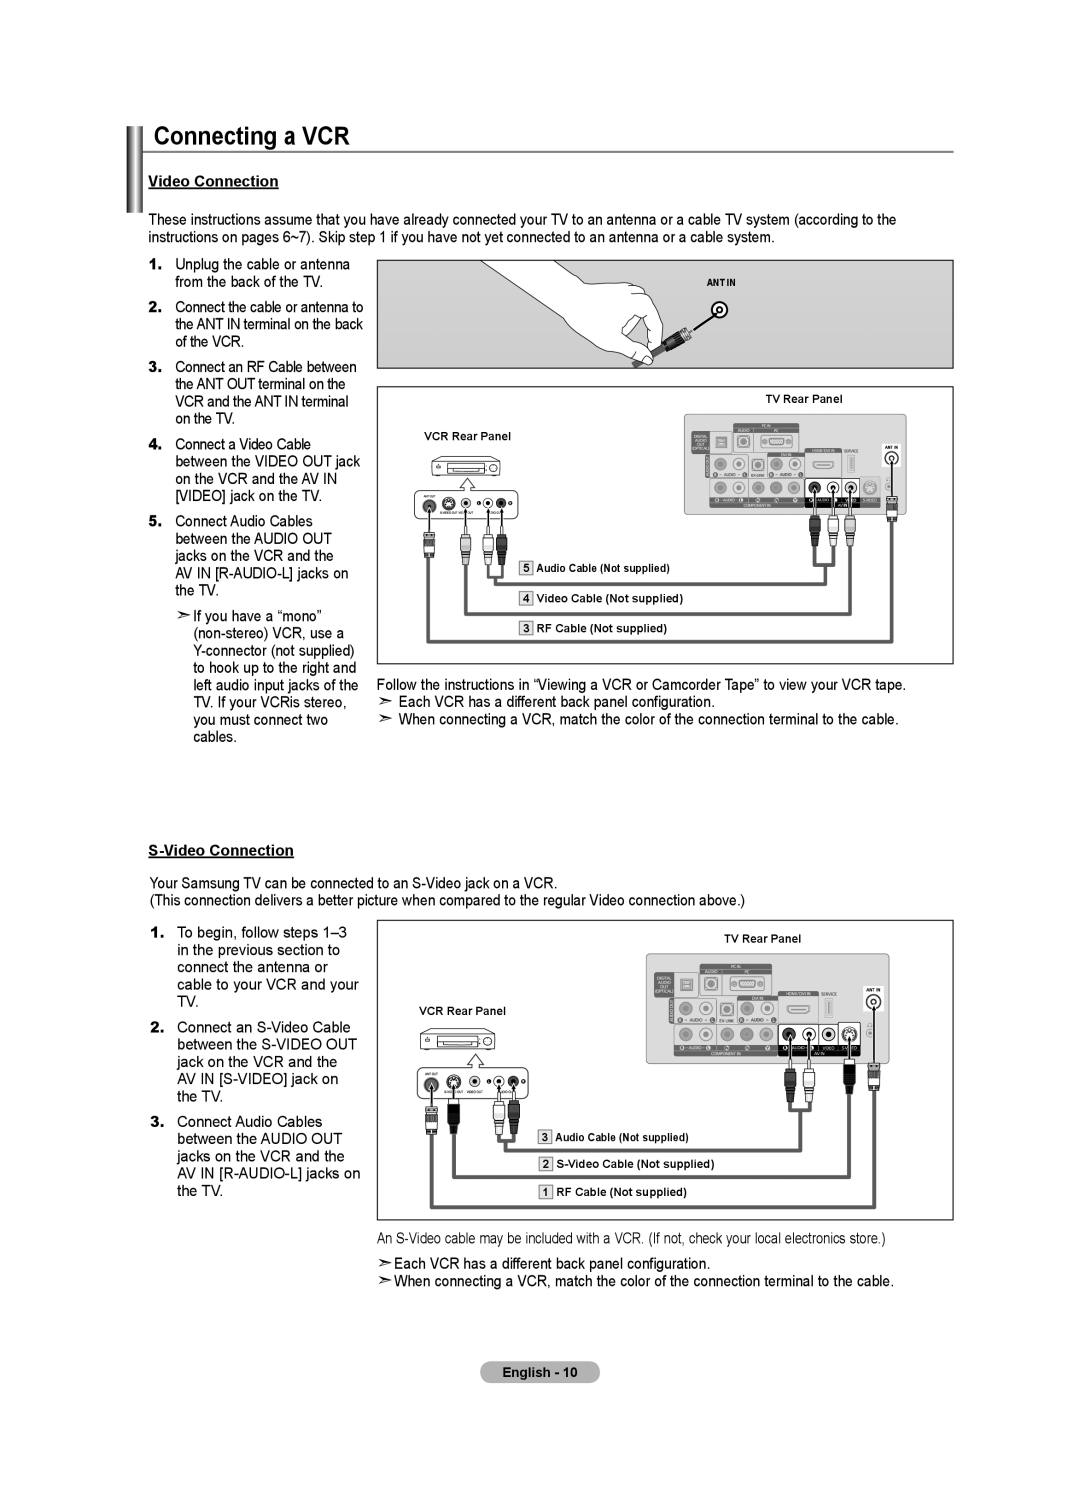 Samsung LN22A330, LN22A0J1D, Series L3 user manual Connecting a VCR, S-Video Connection 